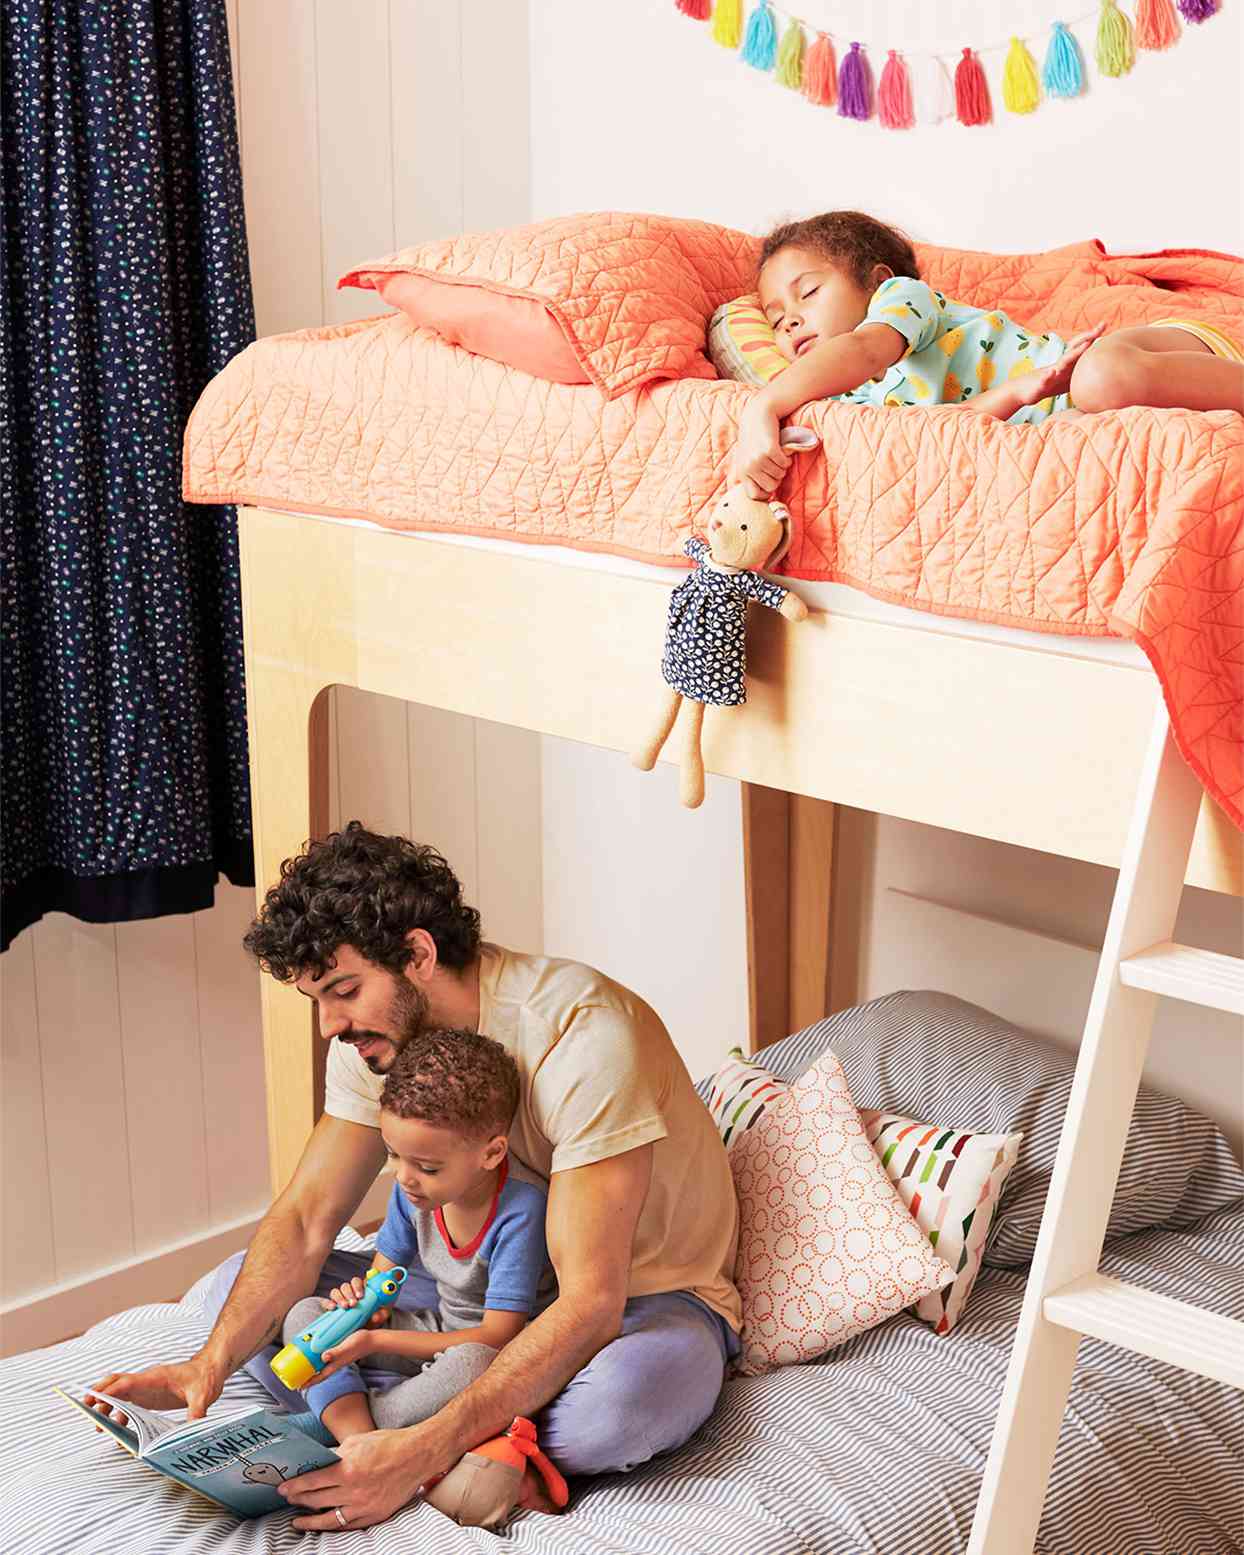 Sleep Train Toddlers And Big Kids, Good Age For Bunk Beds